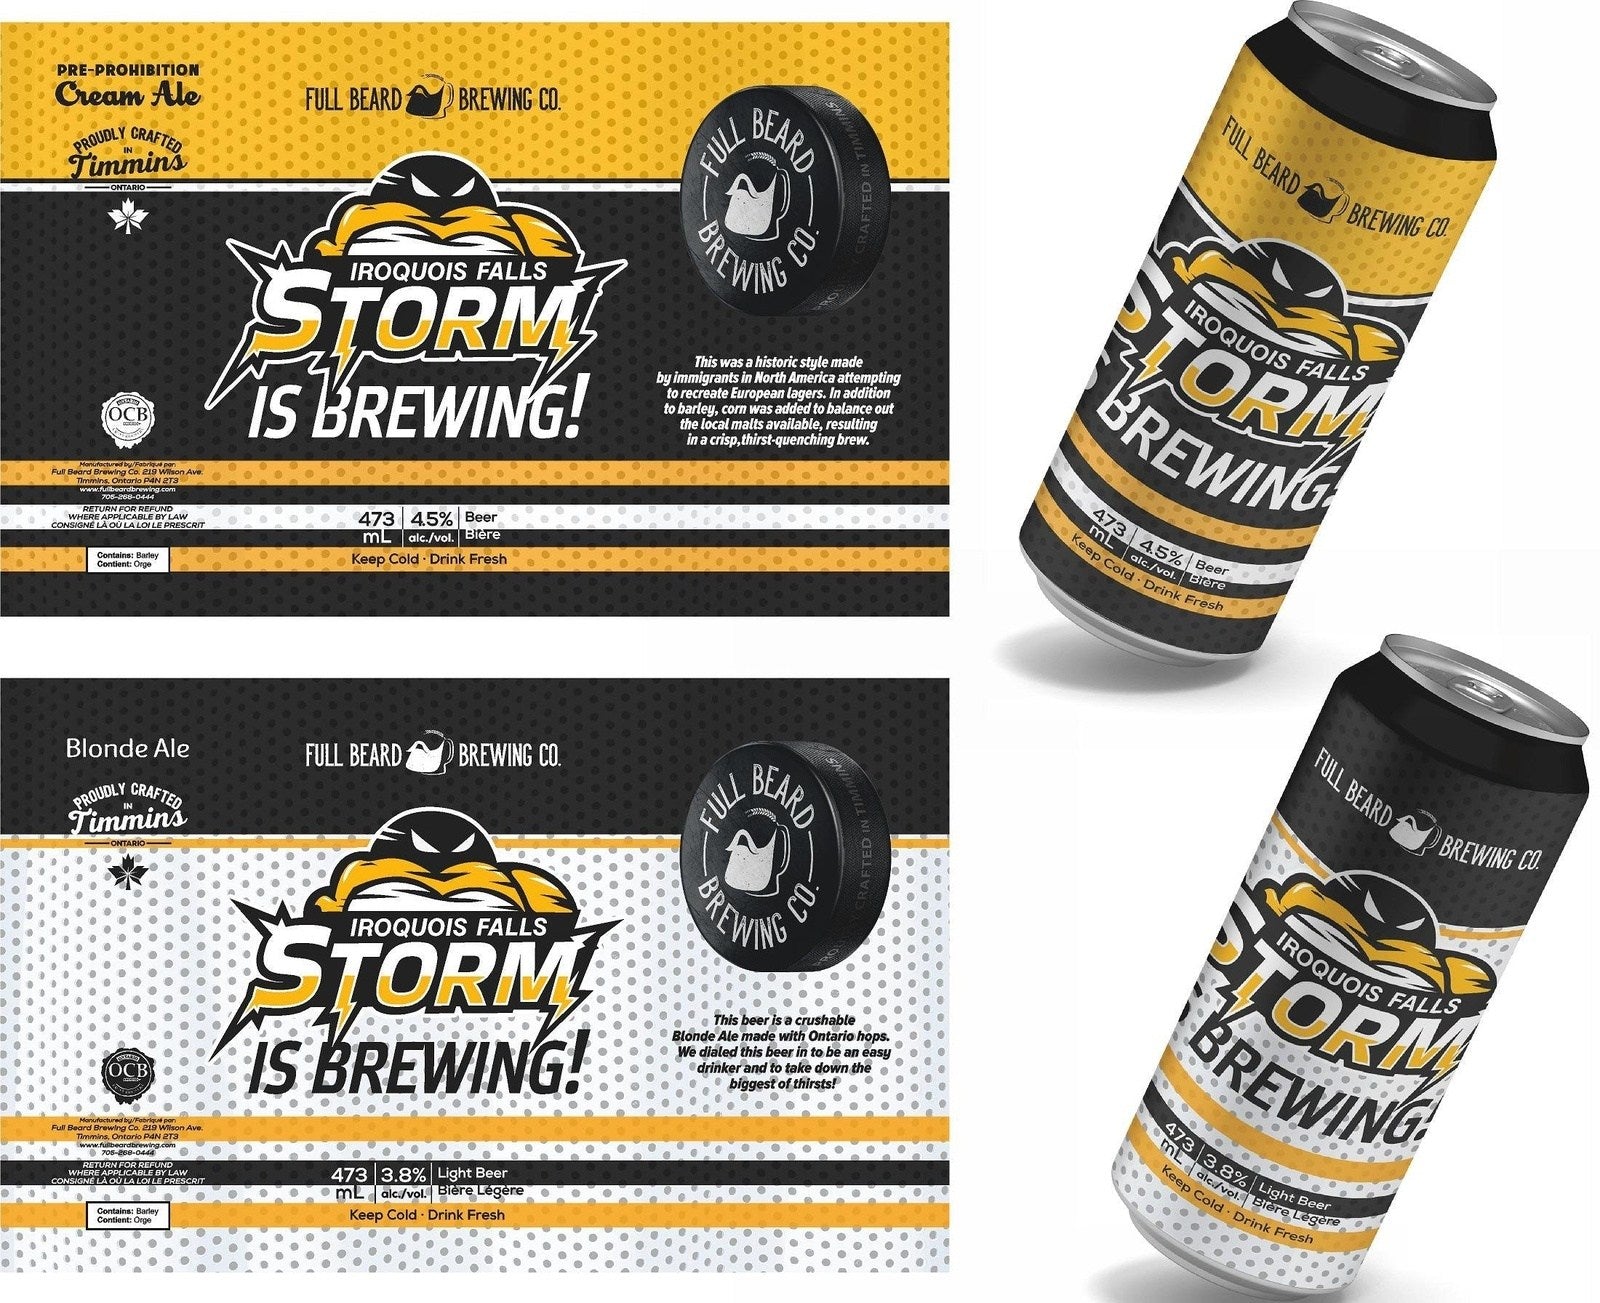 A-STORM IS BREWING Cream Ale - Full Beard Brewing